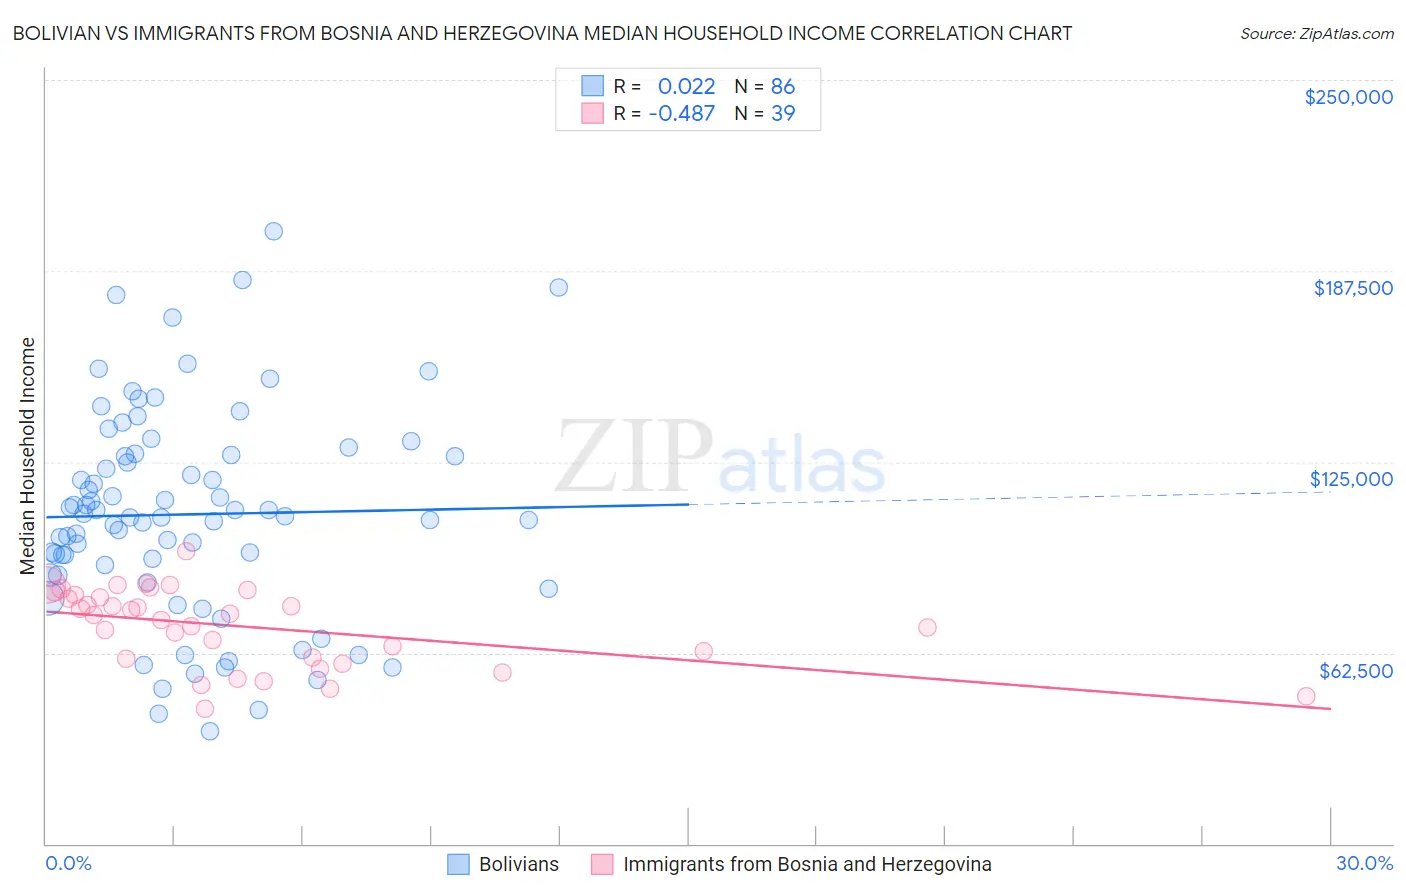 Bolivian vs Immigrants from Bosnia and Herzegovina Median Household Income